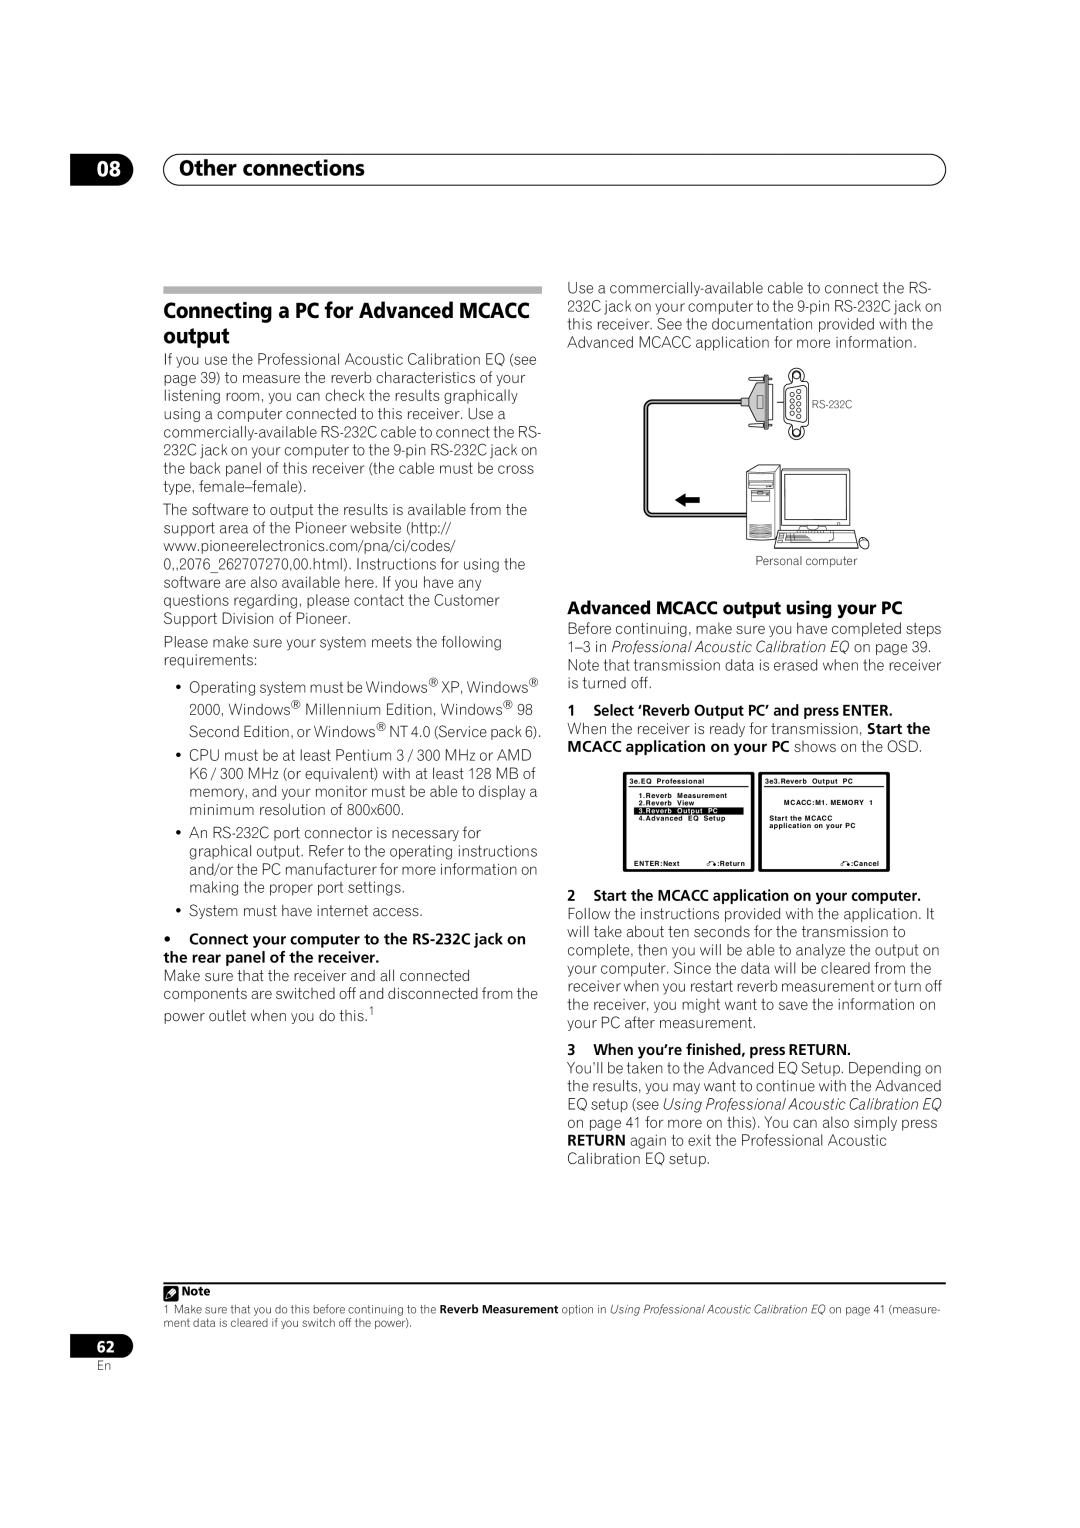 Pioneer VSX-82TXS manual Connecting a PC for Advanced MCACC output, Advanced MCACC output using your PC, Other connections 